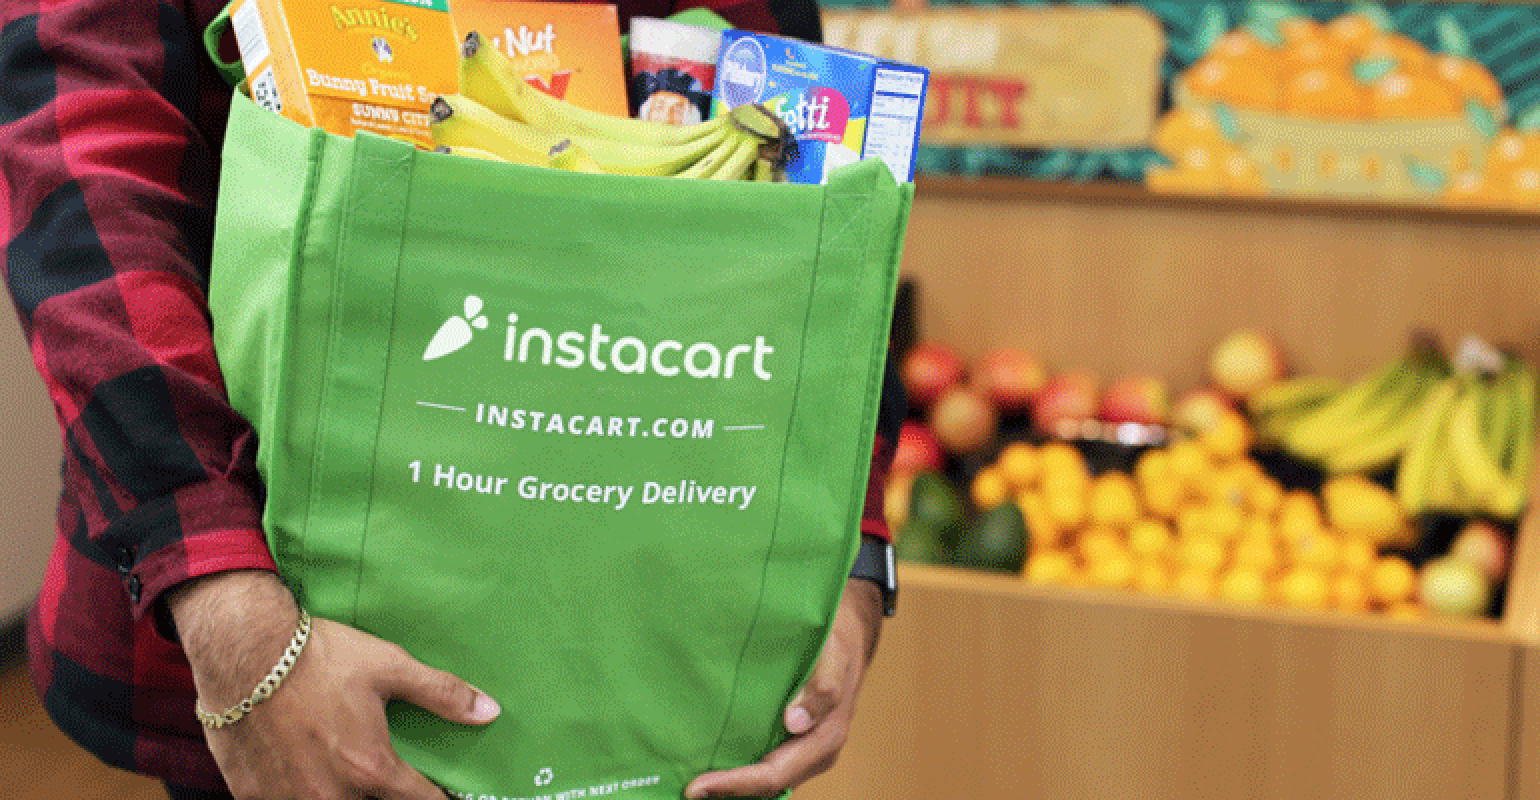 Person holding Instacart personal shopper bag